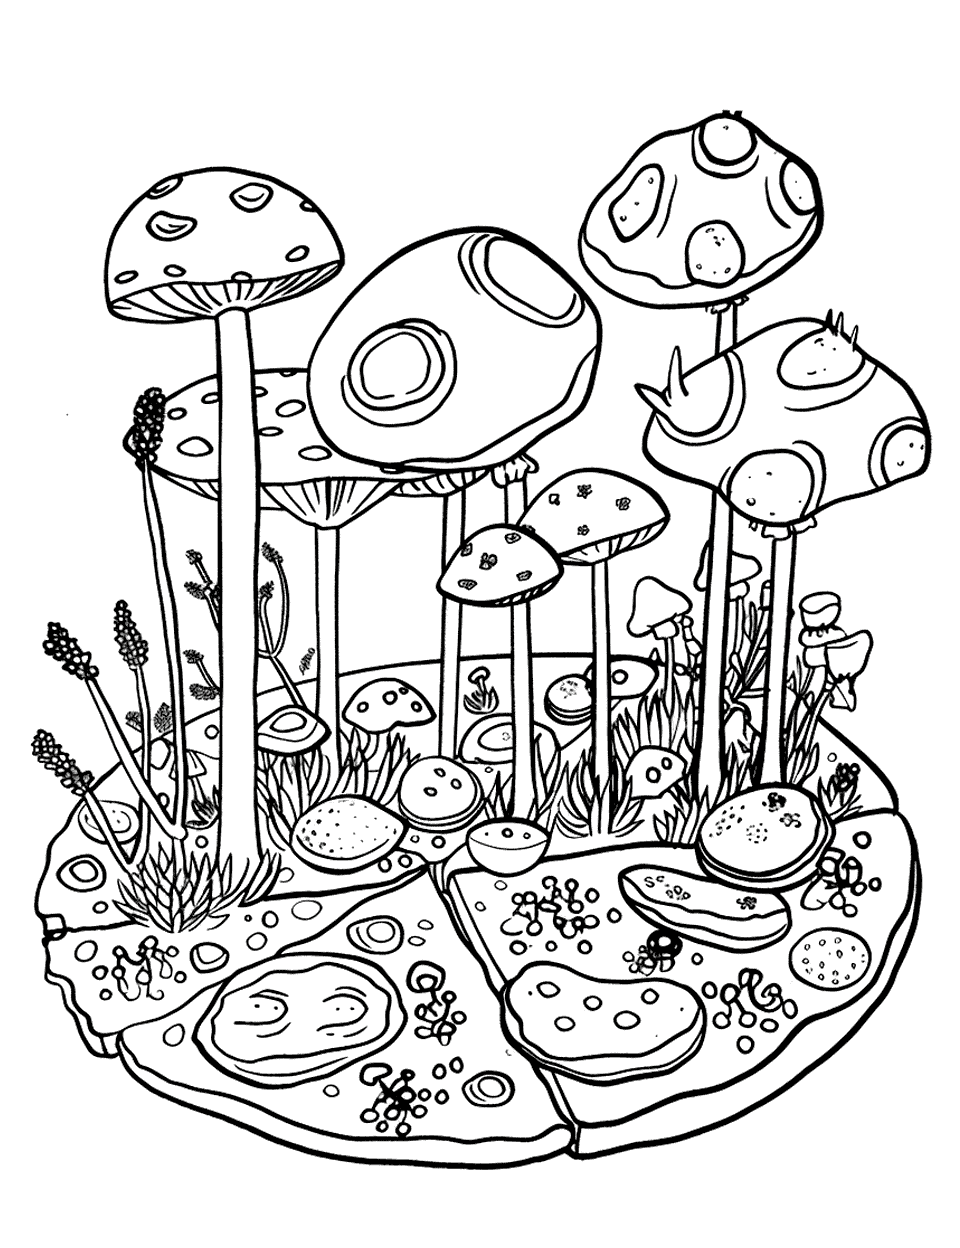 Pizza Garden Coloring Page - A garden where pizza toppings grow like plants, with tomatoes, peppers, and mushrooms.